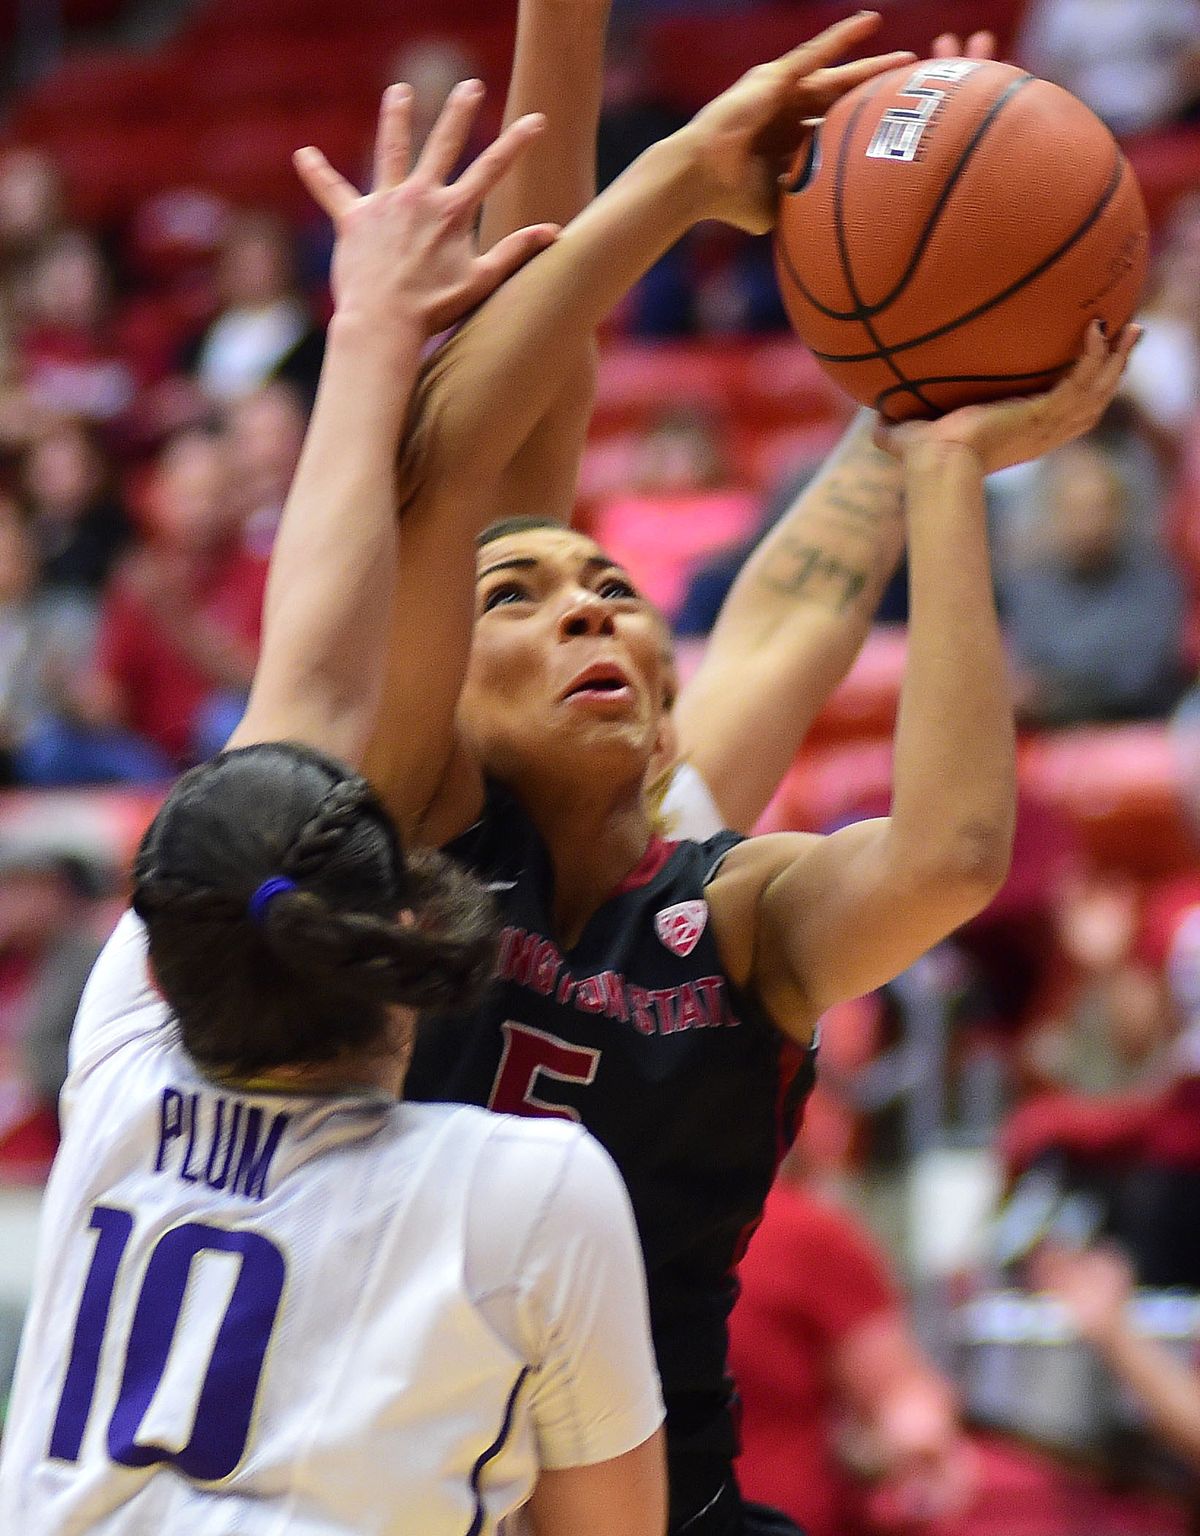 WSU’s Tia Presley shoots during Sunday’s game in which she scored eight points. (Tyler Tjomsland)